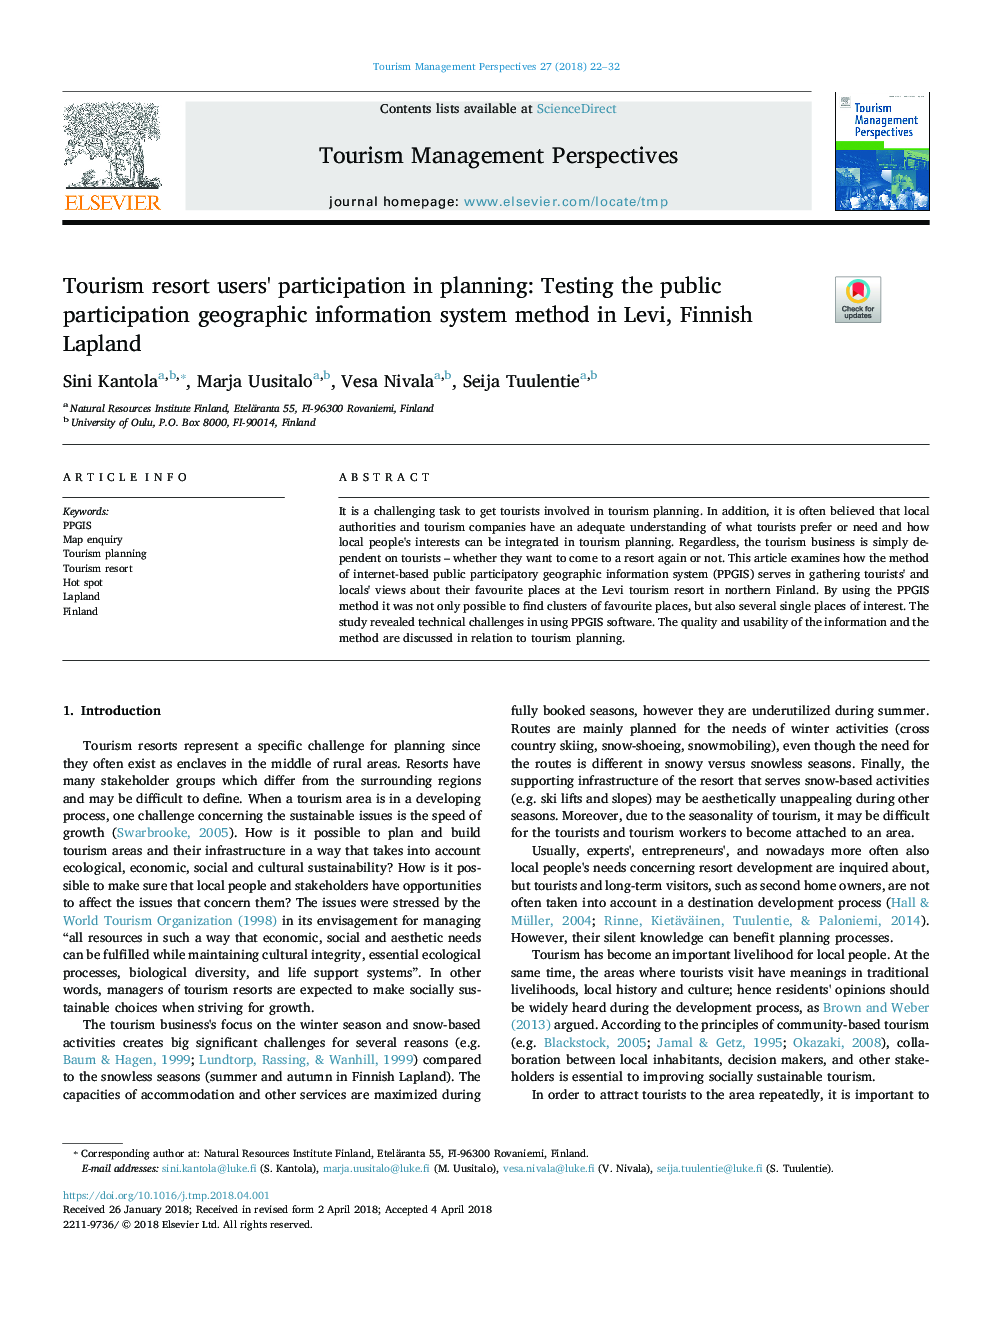 Tourism resort users' participation in planning: Testing the public participation geographic information system method in Levi, Finnish Lapland